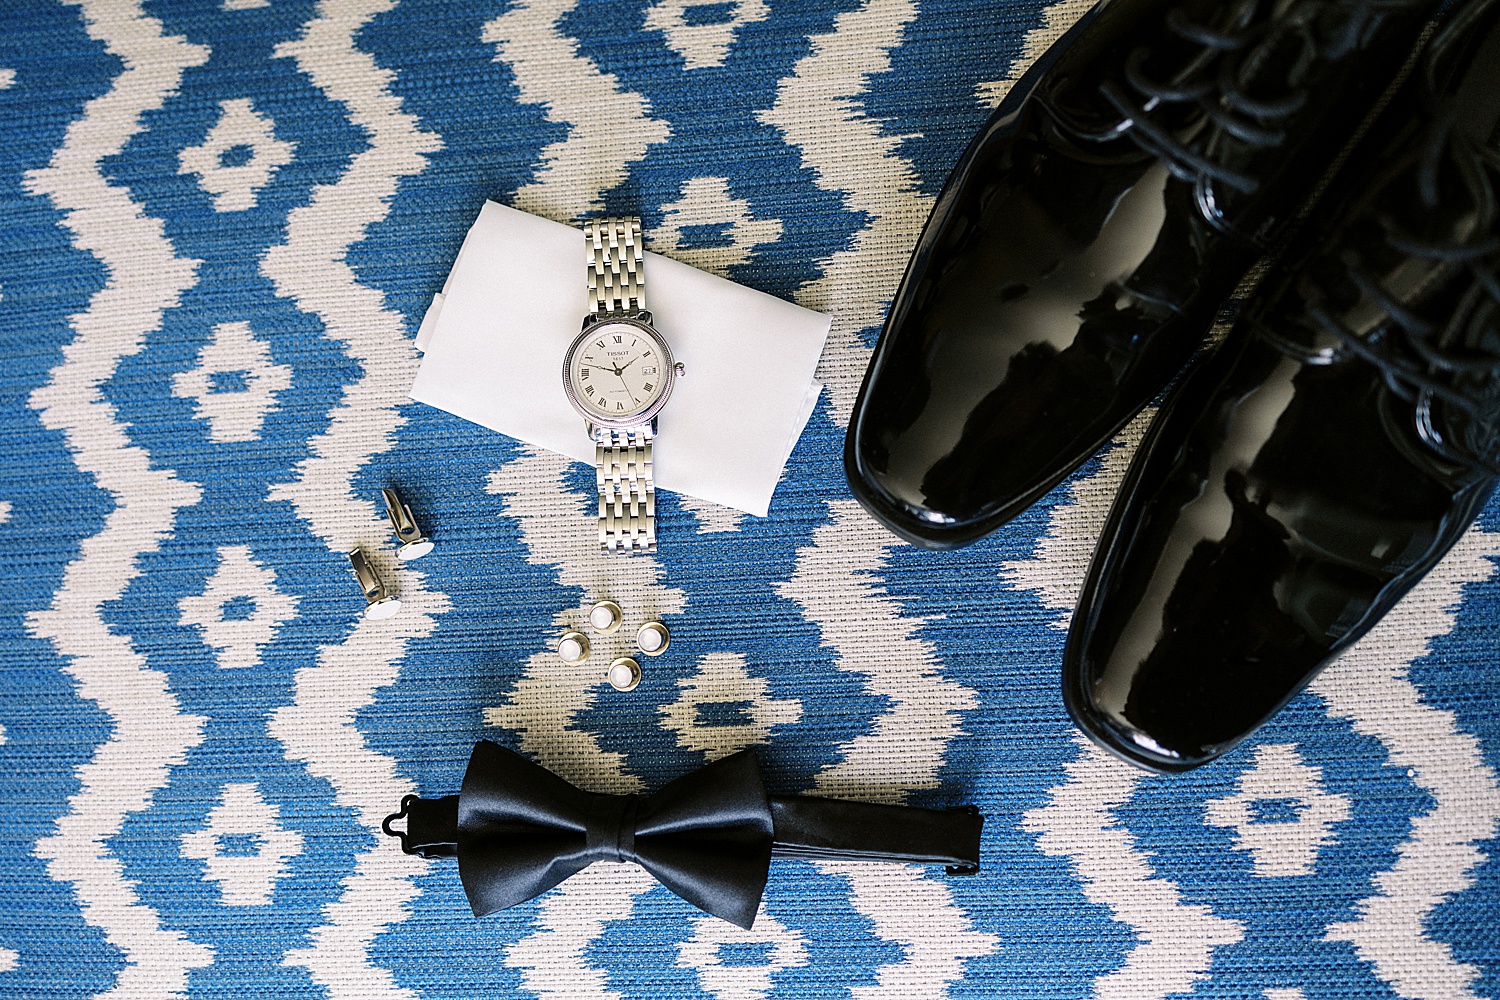 Grooms details like watch and bowtie by Lynne Reznick photography